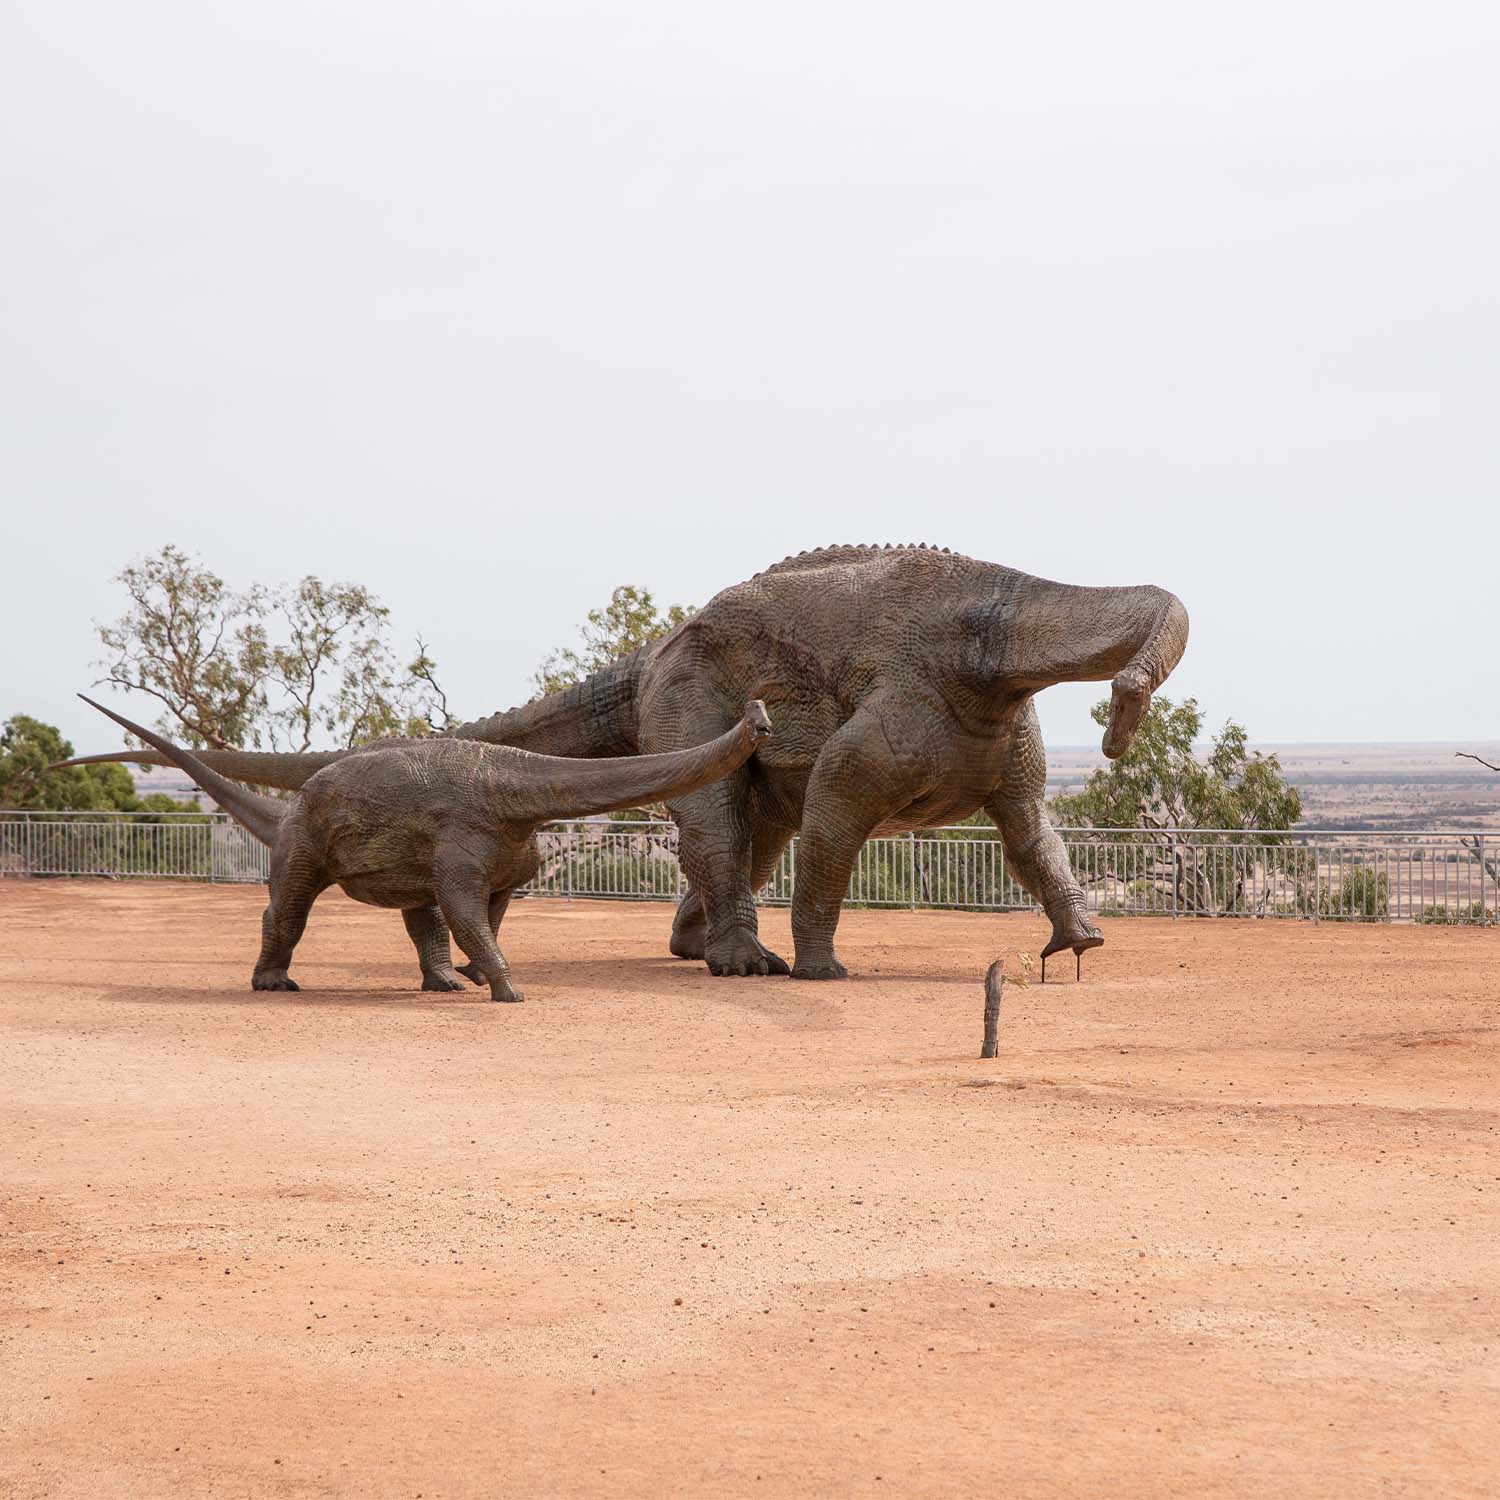 Two dinosaur statues in front of a low fence